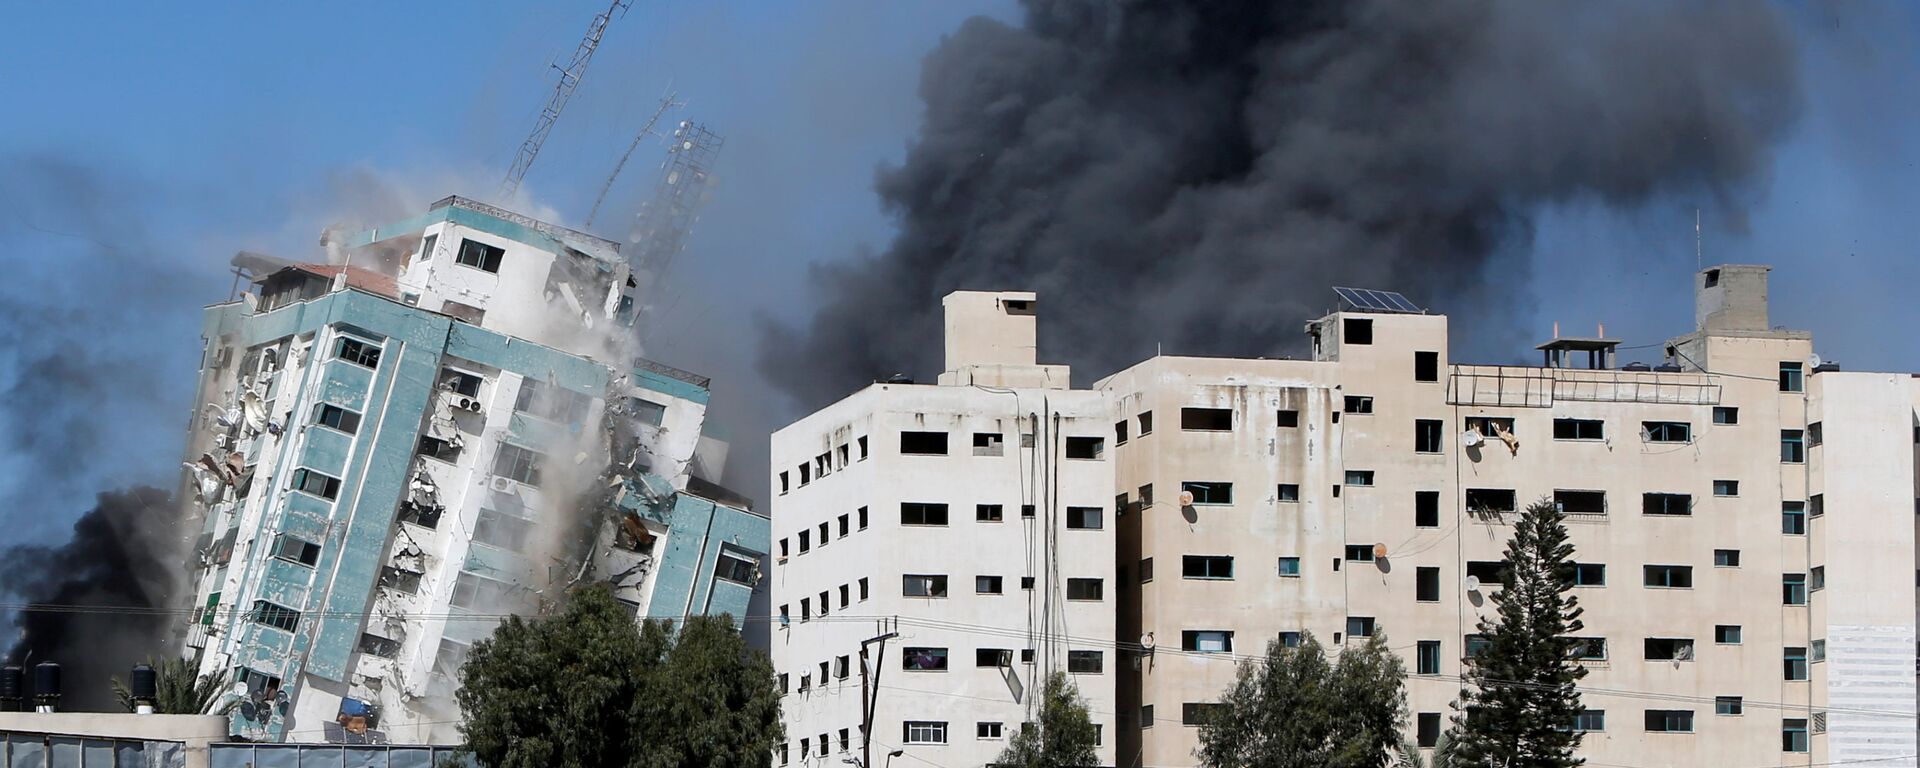 A tower housing AP, Al Jazeera offices collapses after Israeli missile strikes in Gaza city, May 15, 2021.  - Sputnik International, 1920, 17.05.2021